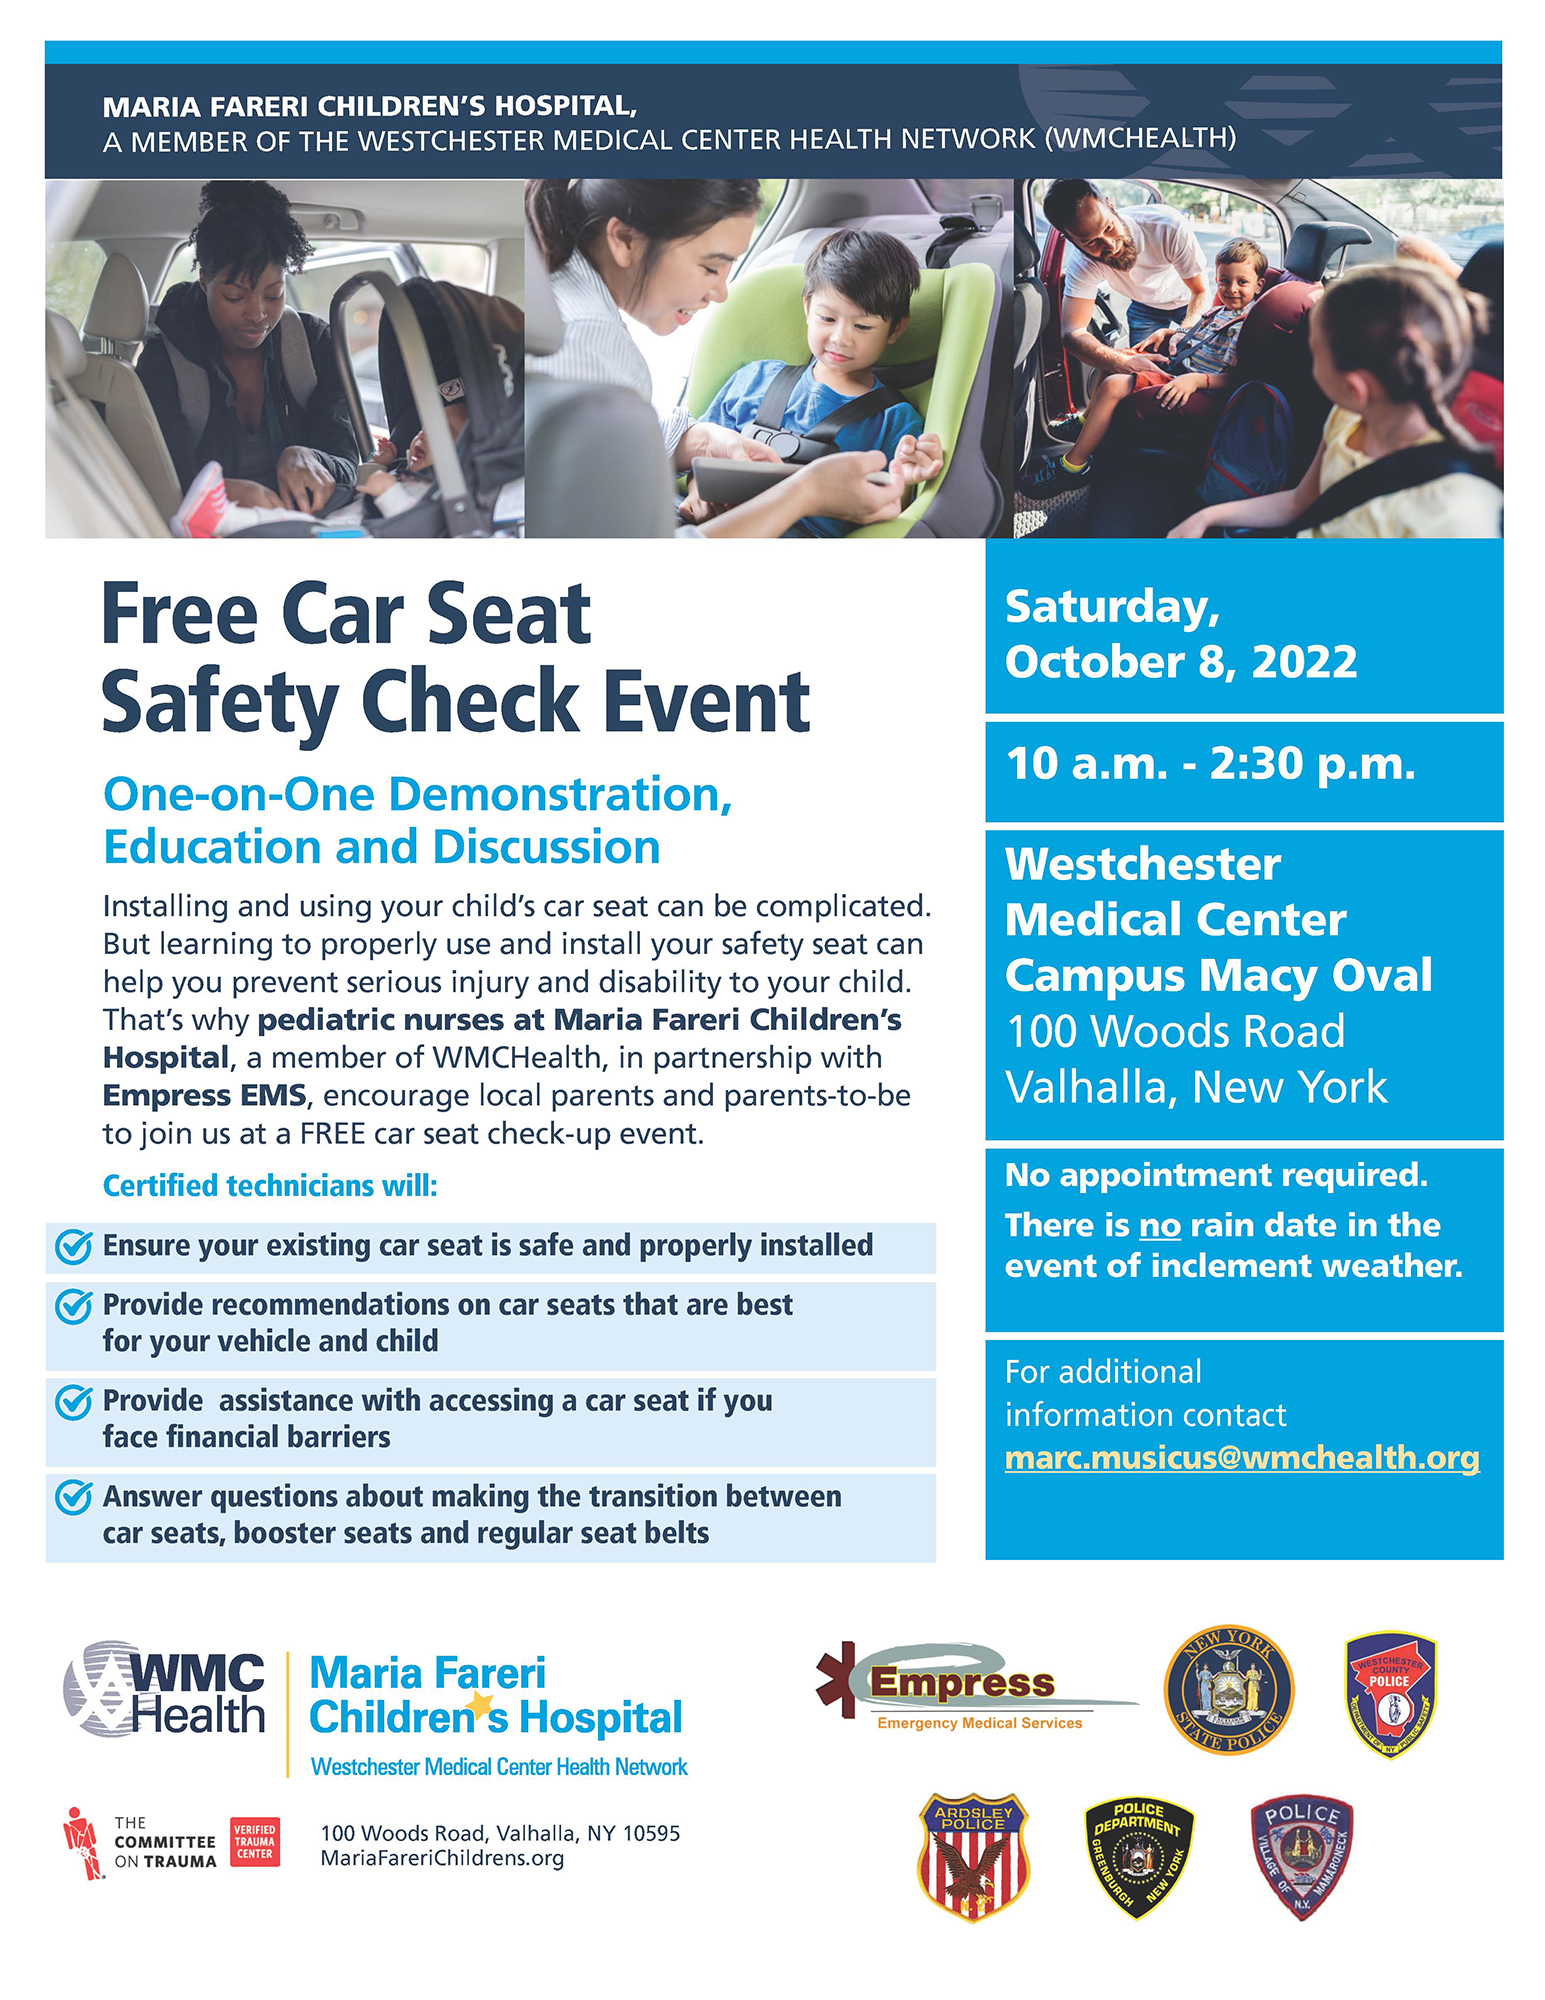 Free Car Seat Safety Check Event